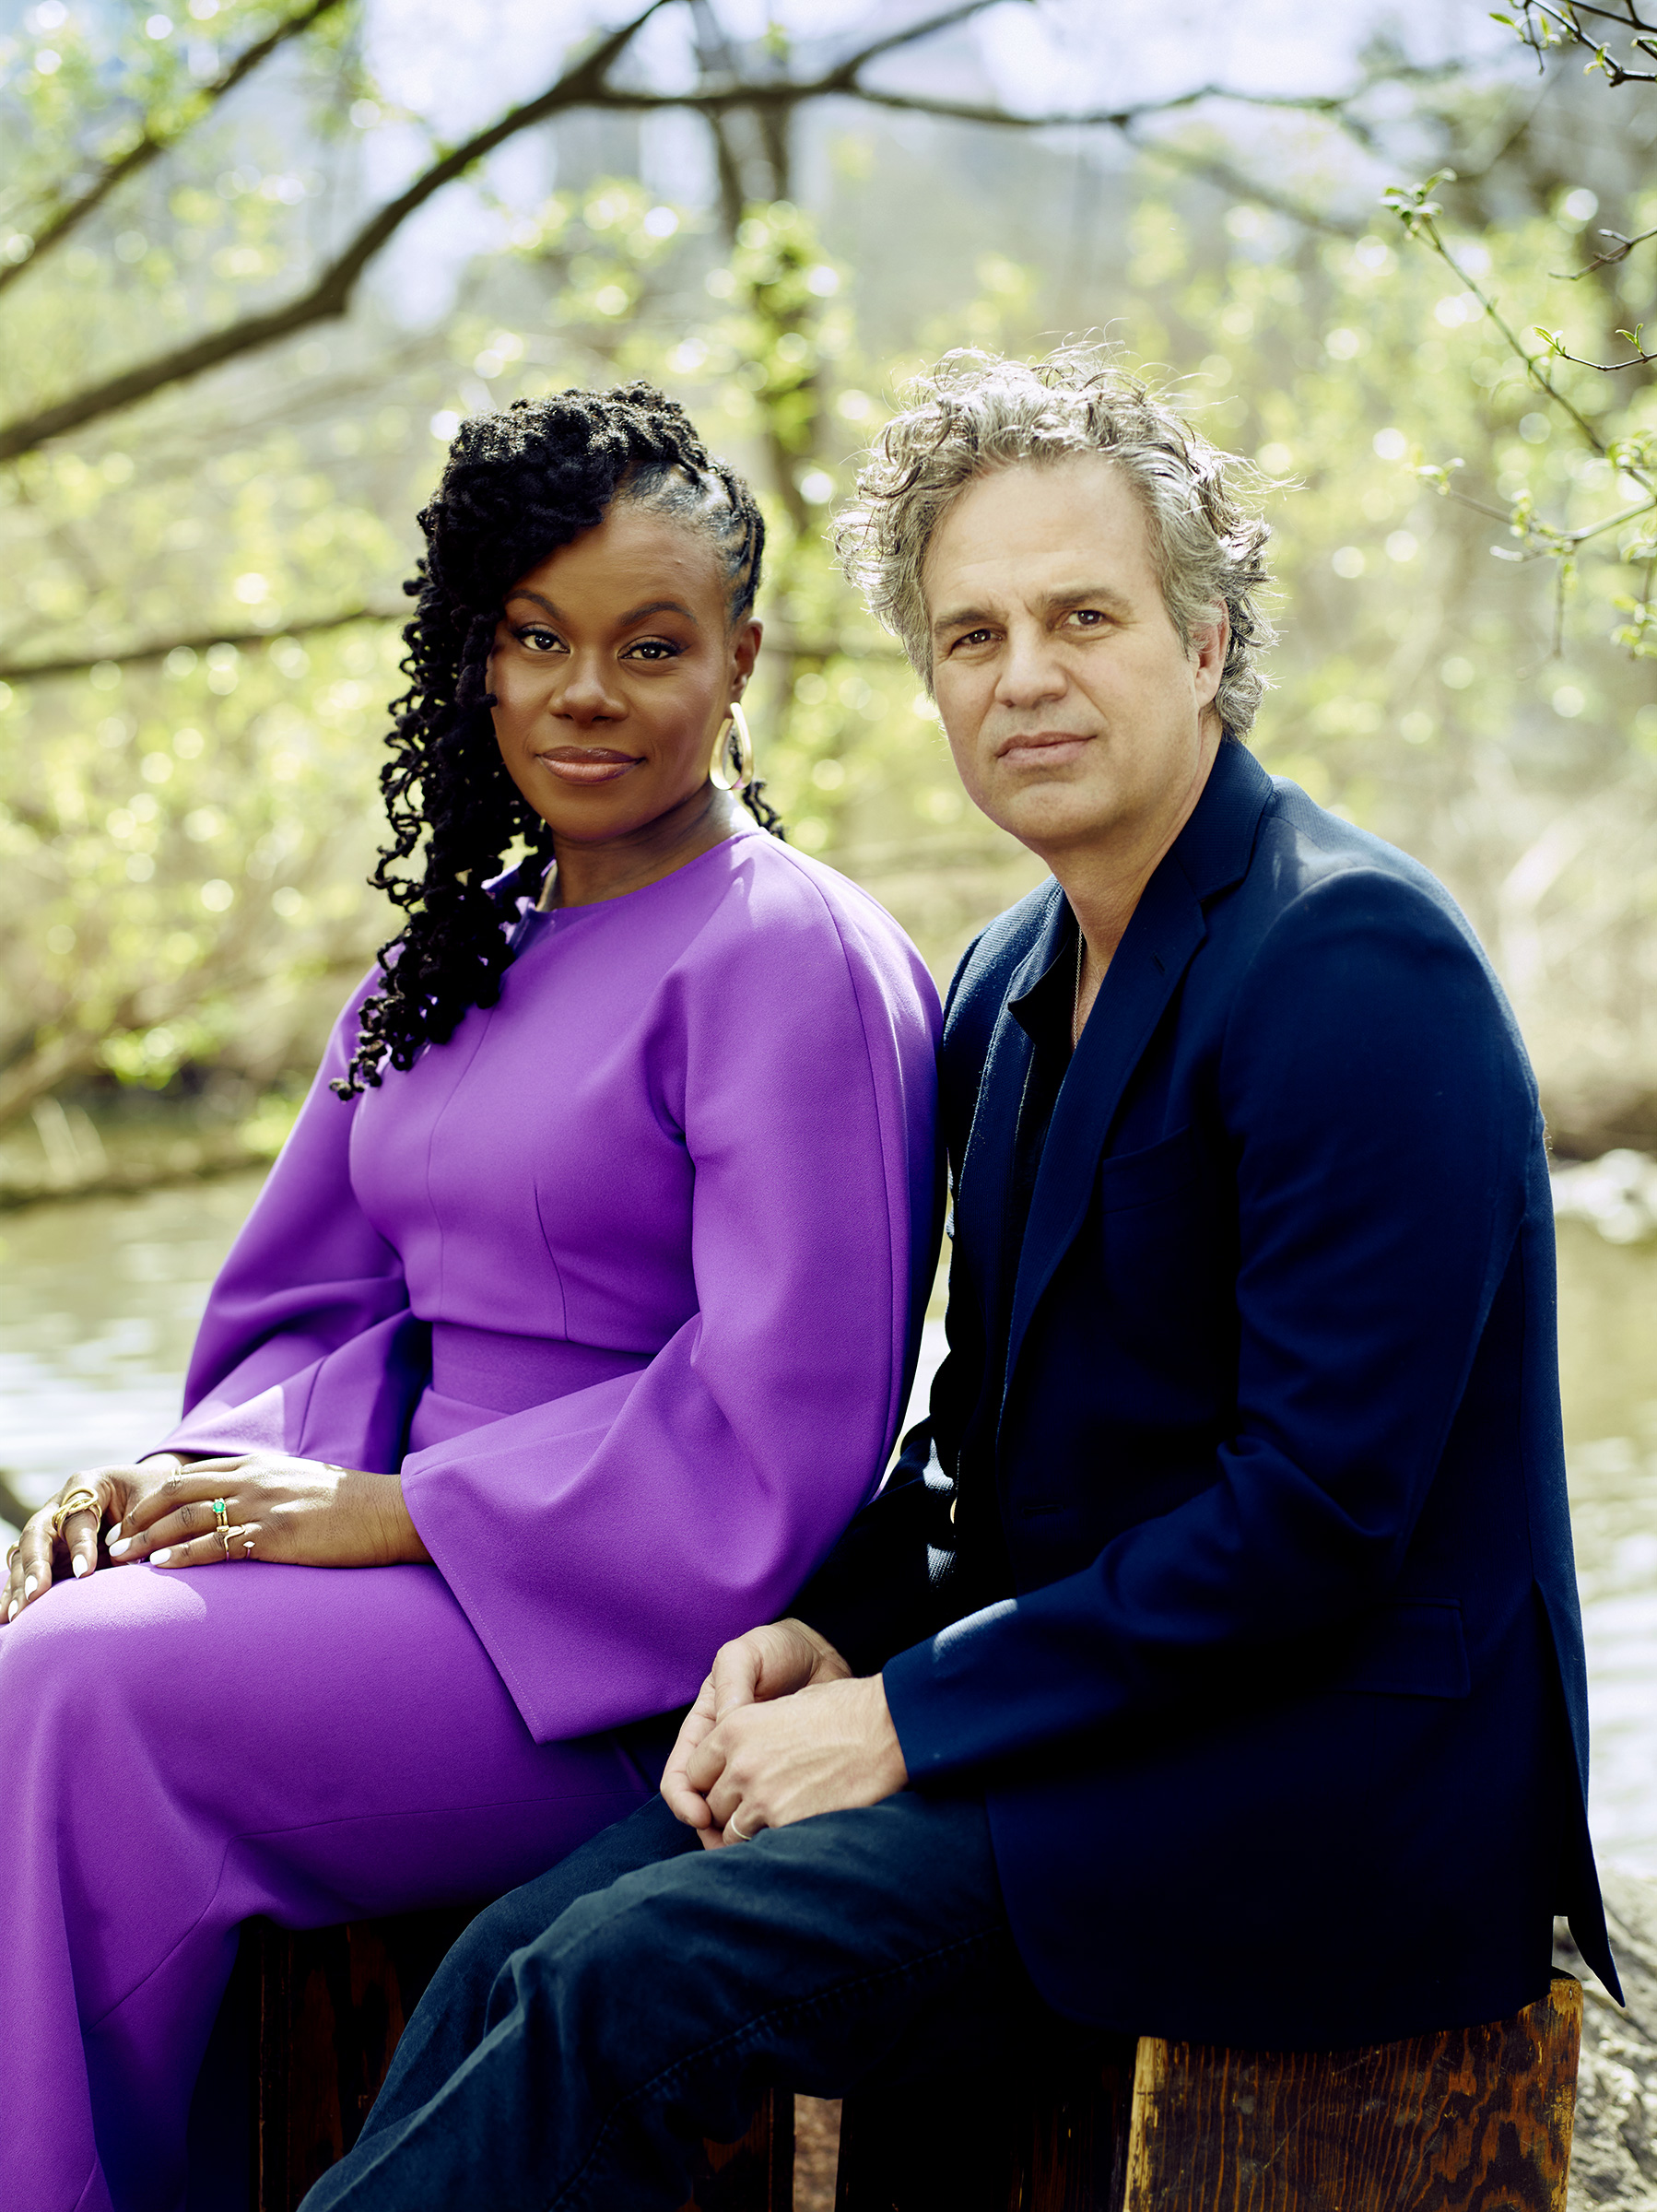 Walton and Ruffalo in Central Park in New York City on April 11 (Caroline Tompkins for TIME)